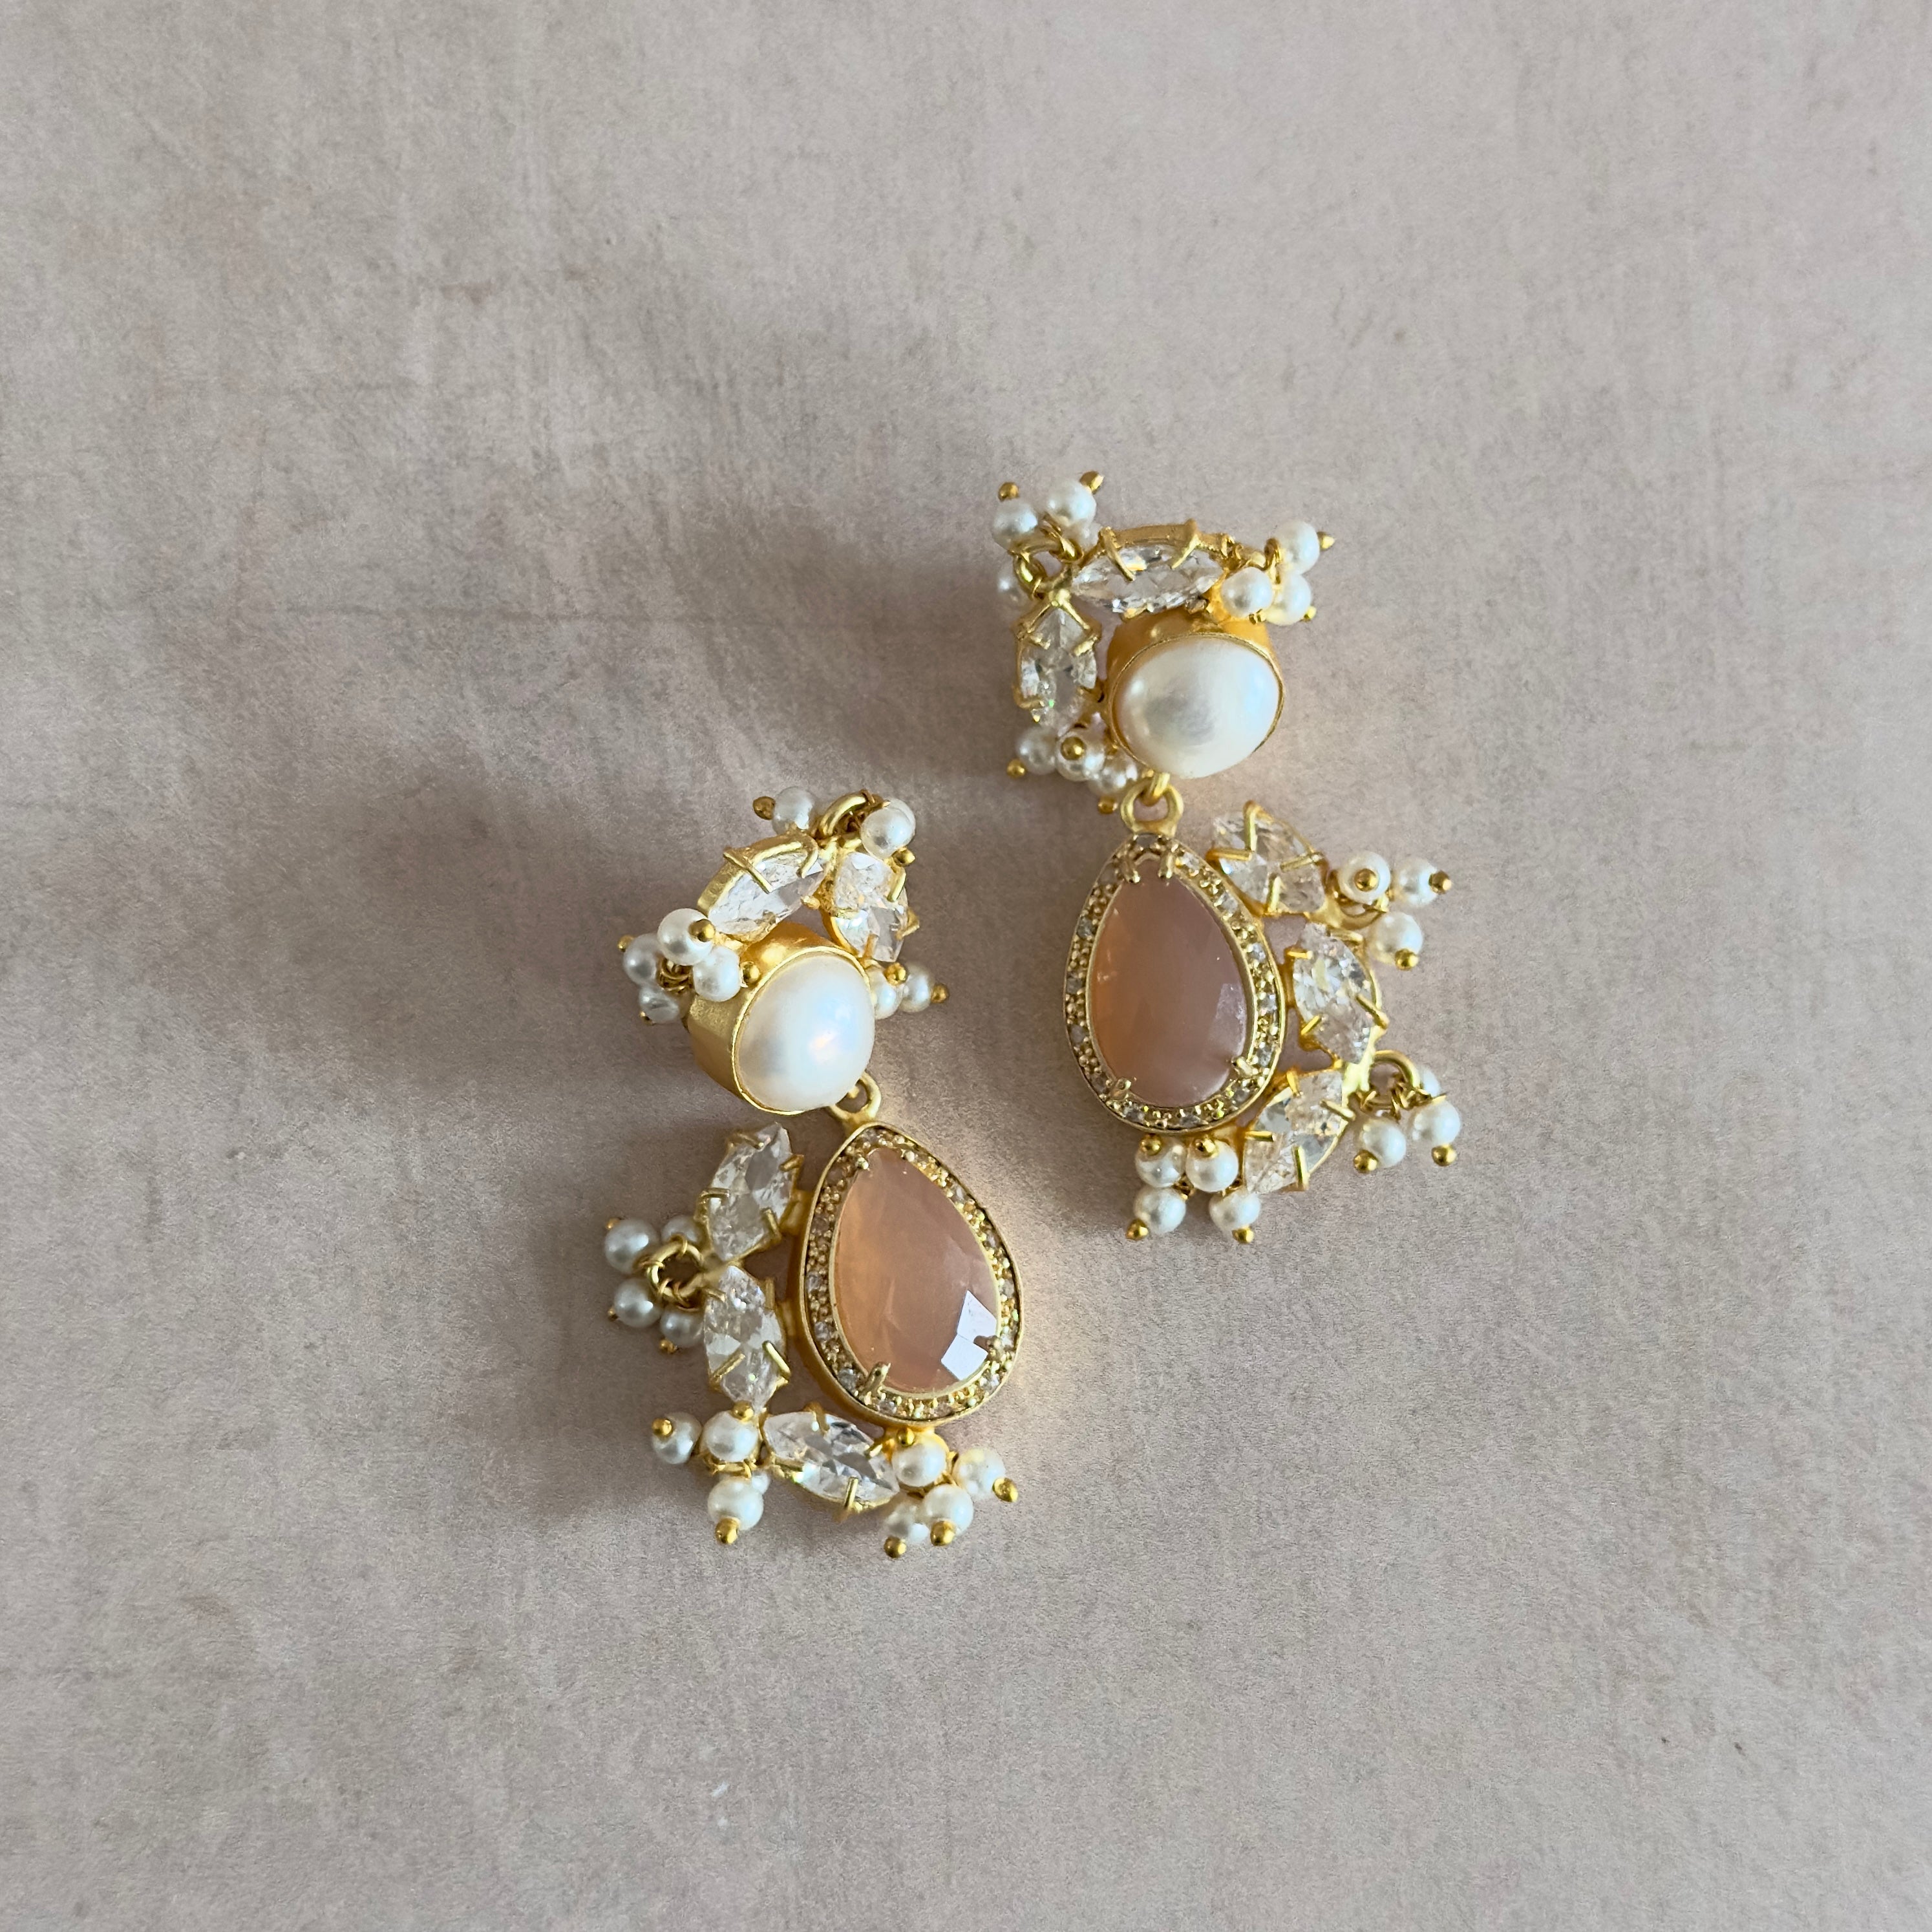 Transform your look with our Peachy Pearl Drop Earrings! Each piece is delicately crafted with peach moonstone and freshwater pearls to add a touch of elegance and natural beauty to any outfit. Elevate your style and embrace the benefits of these stunning earrings.